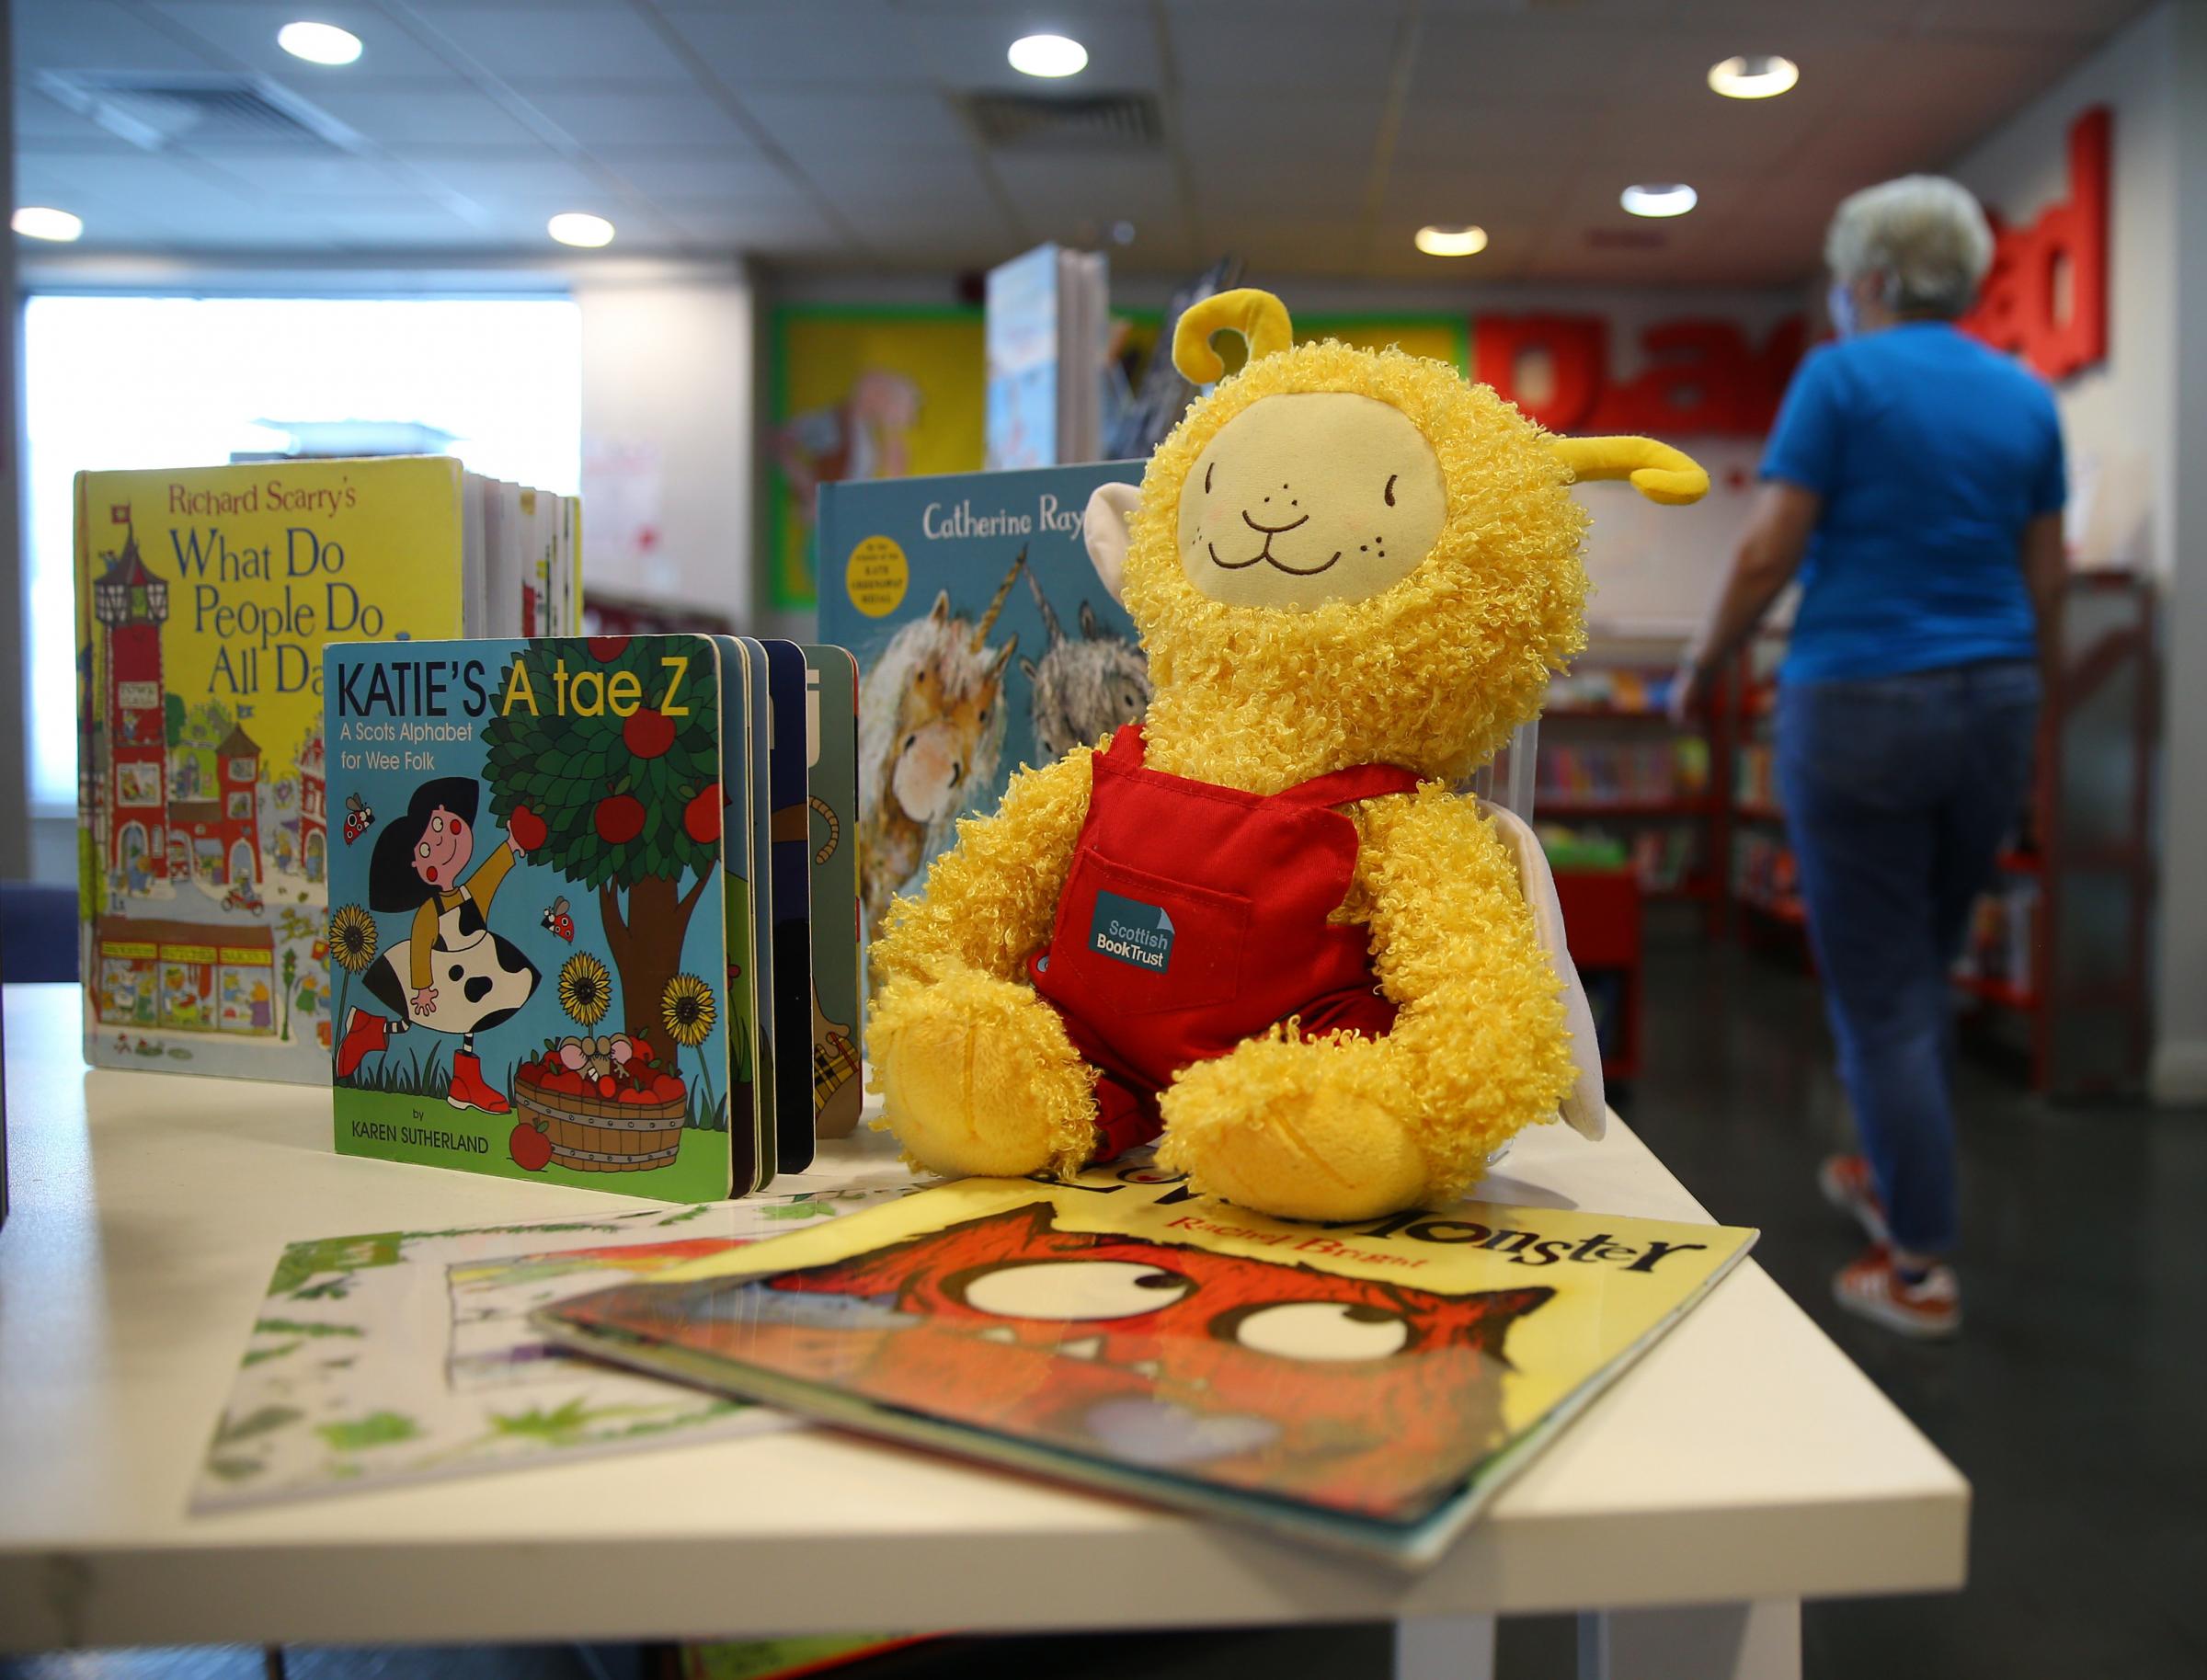 Bookbug figure among books pictured at Gorbals library, Glasgow. Photograph by Colin Mearns.